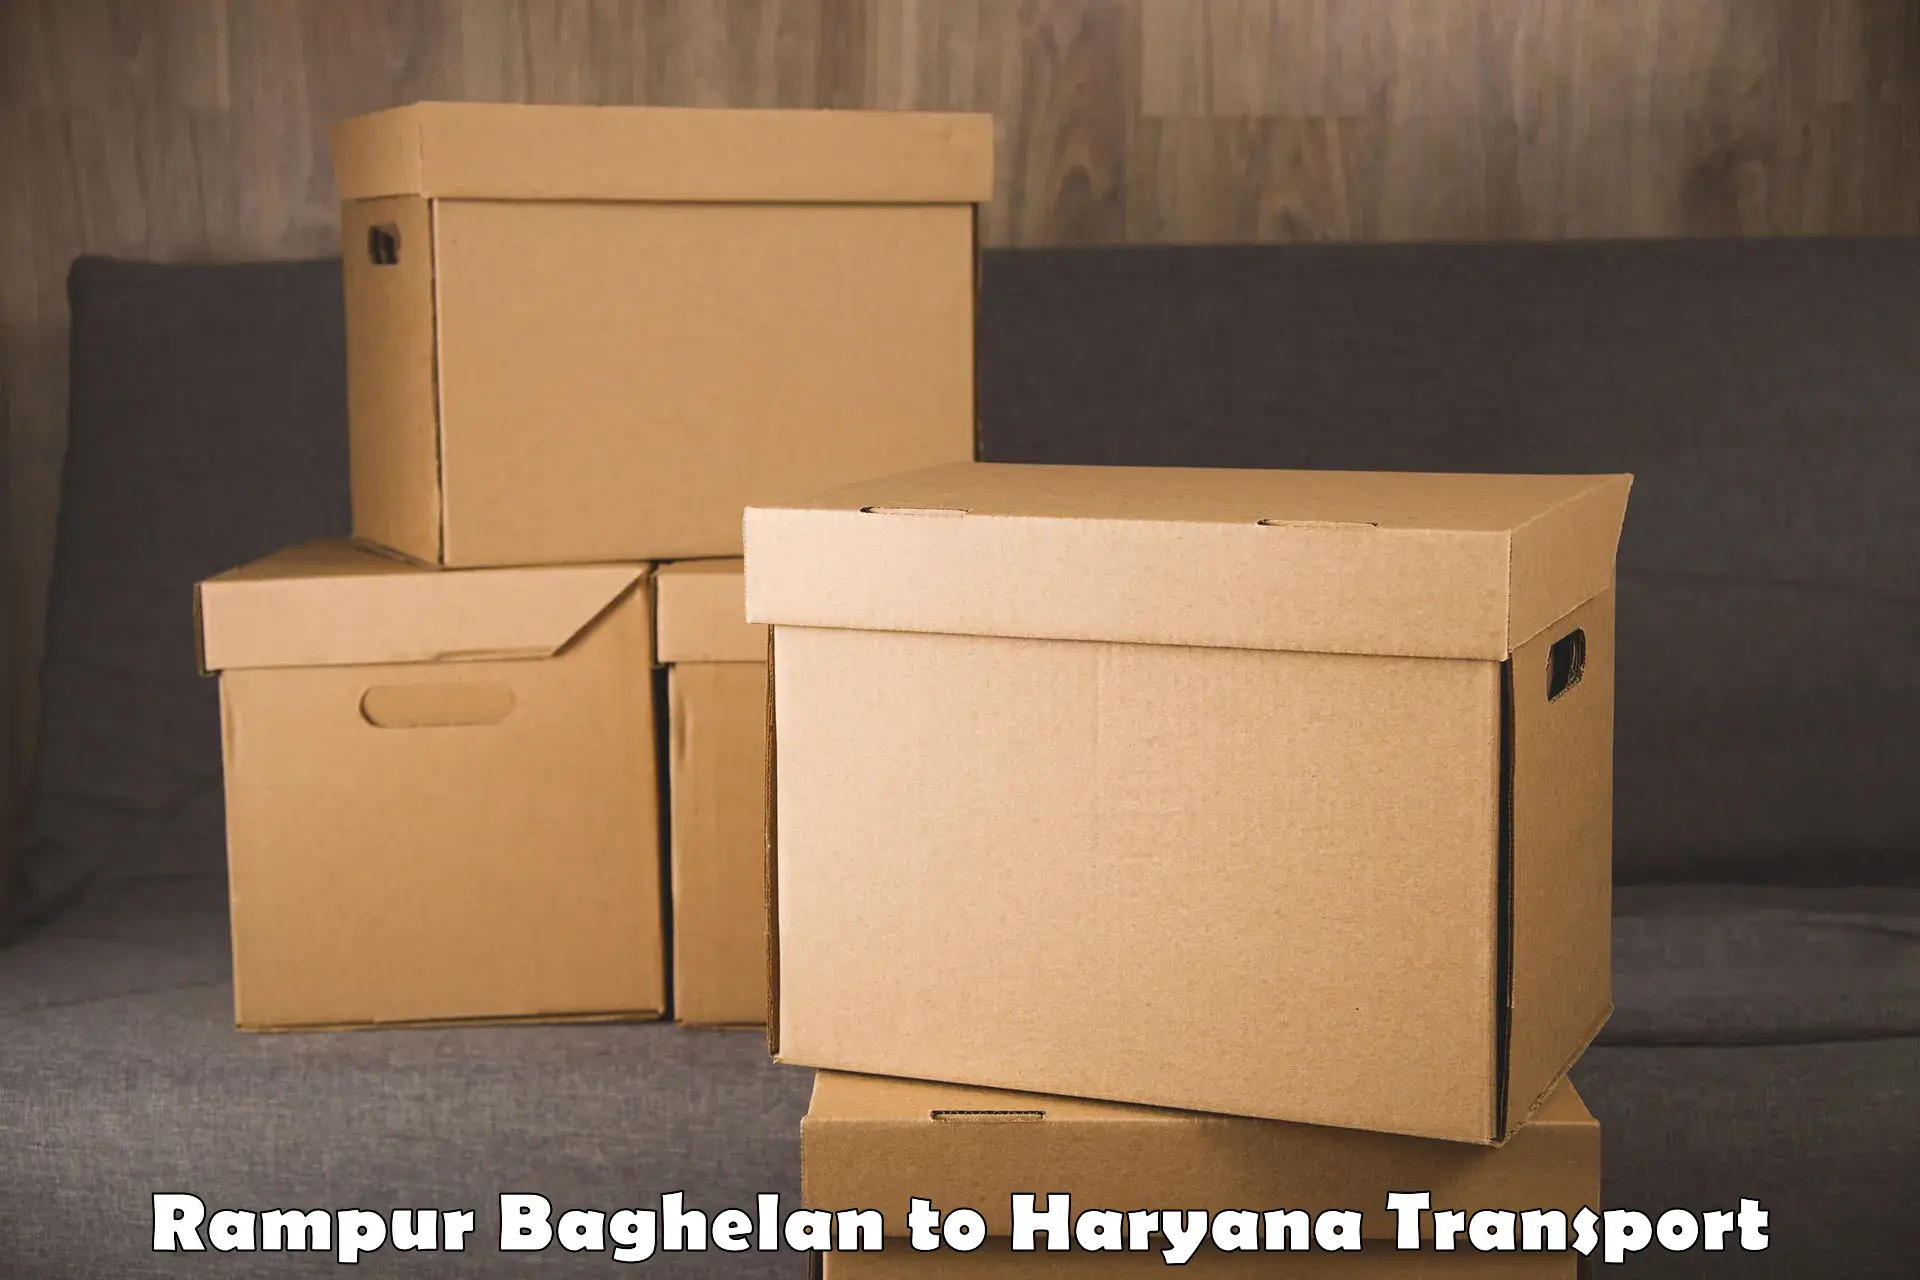 Best transport services in India Rampur Baghelan to Odhan